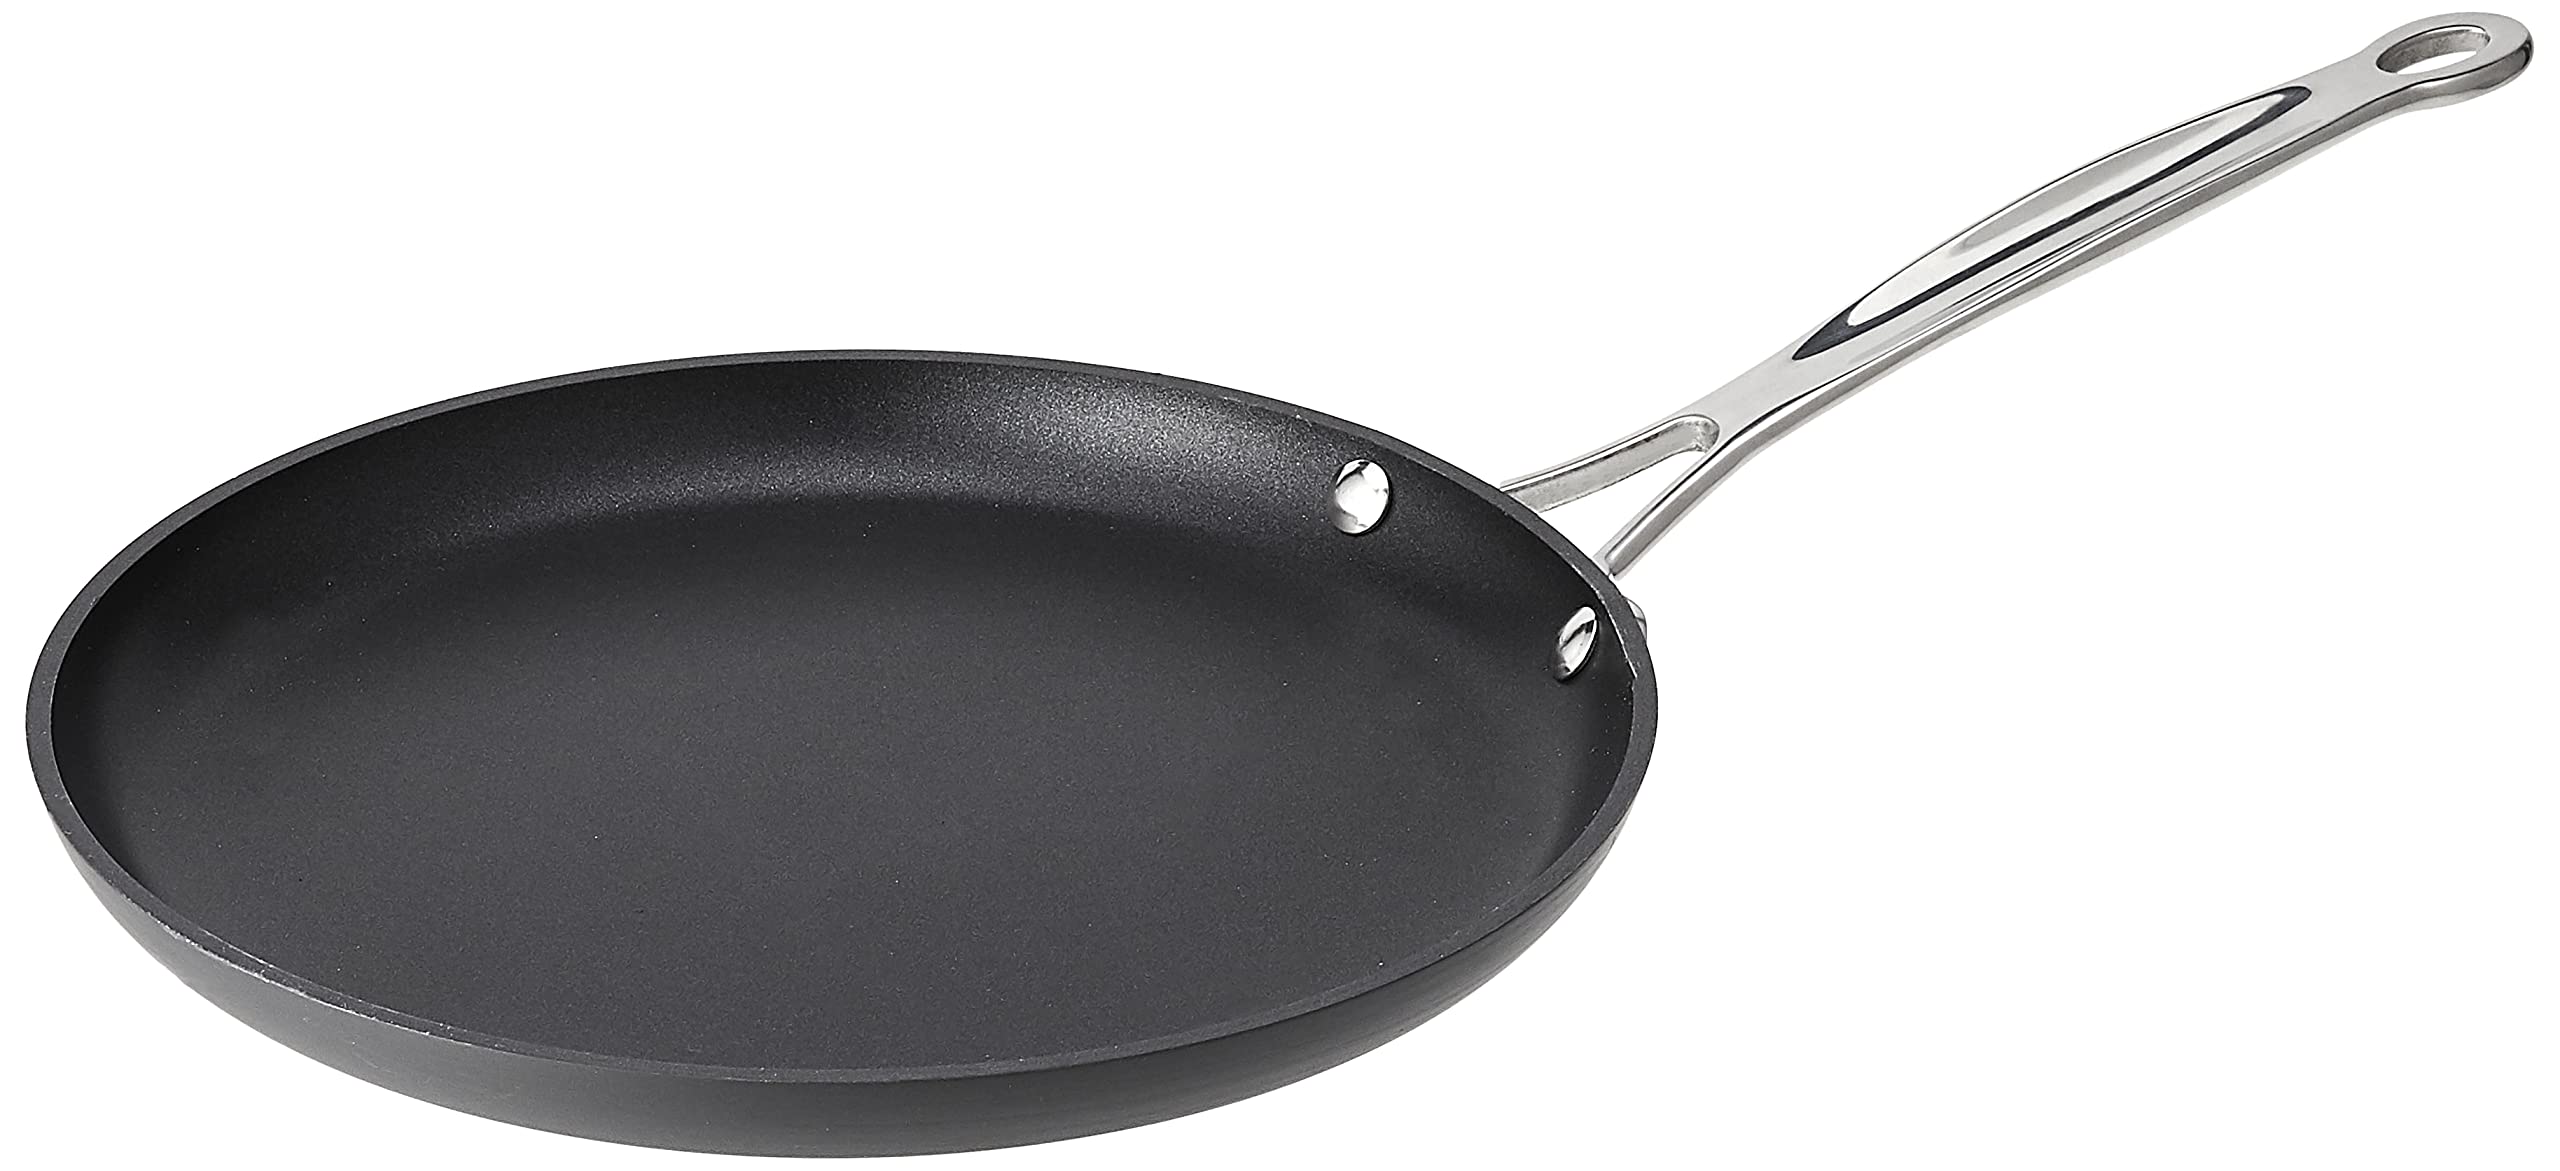 Book Cover Cuisinart 10-Inch Crepe Pan, Chef's Classic Nonstick Hard Anodized, Black, 623-24